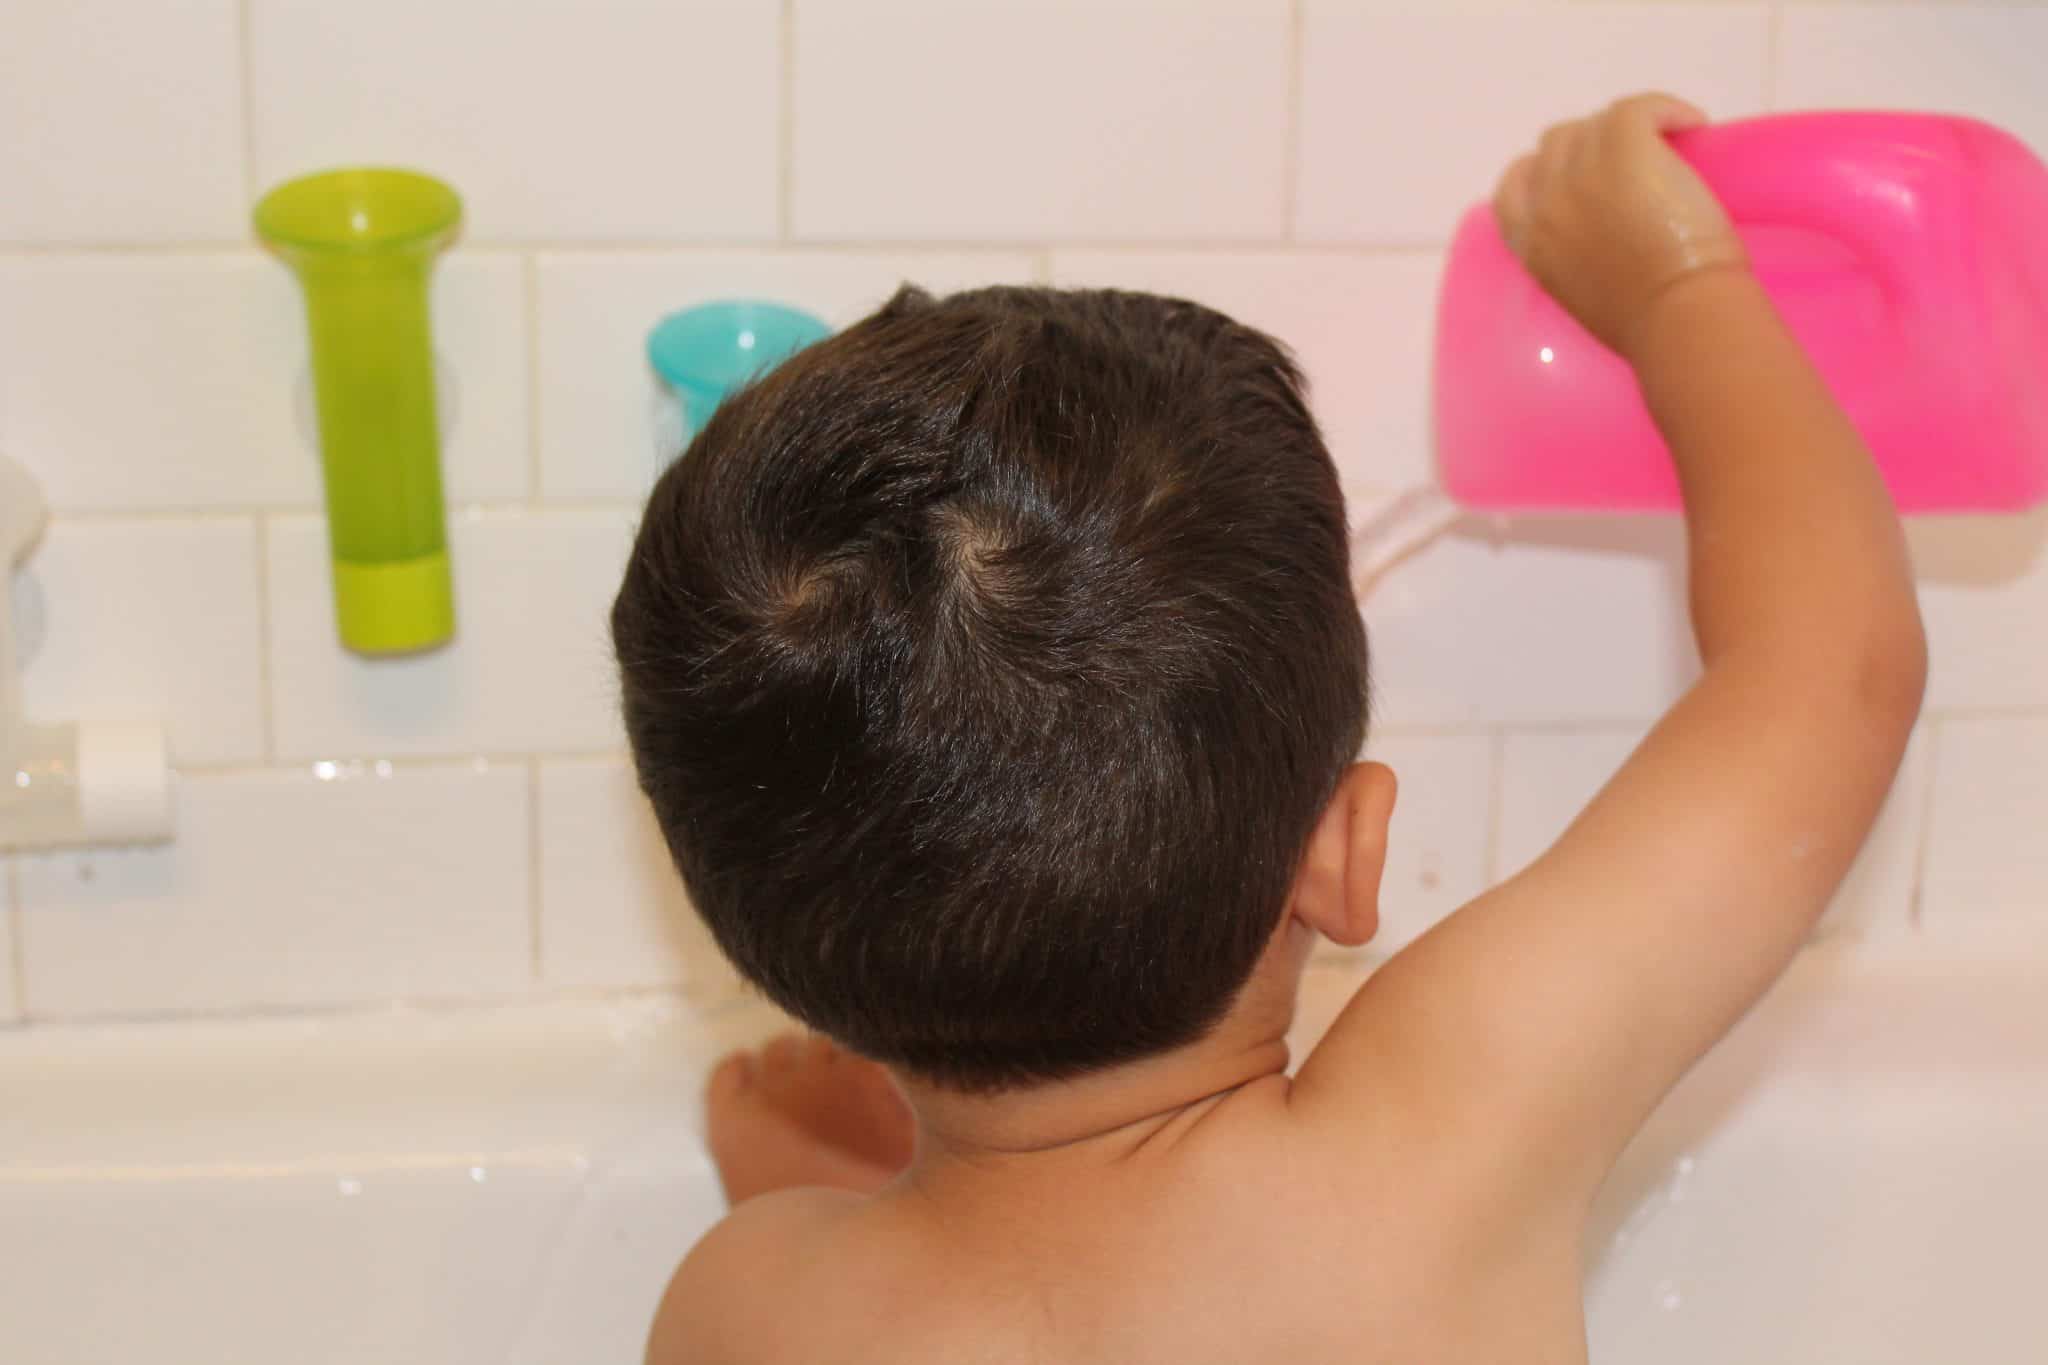 Toddler in the bath tub playing with toys